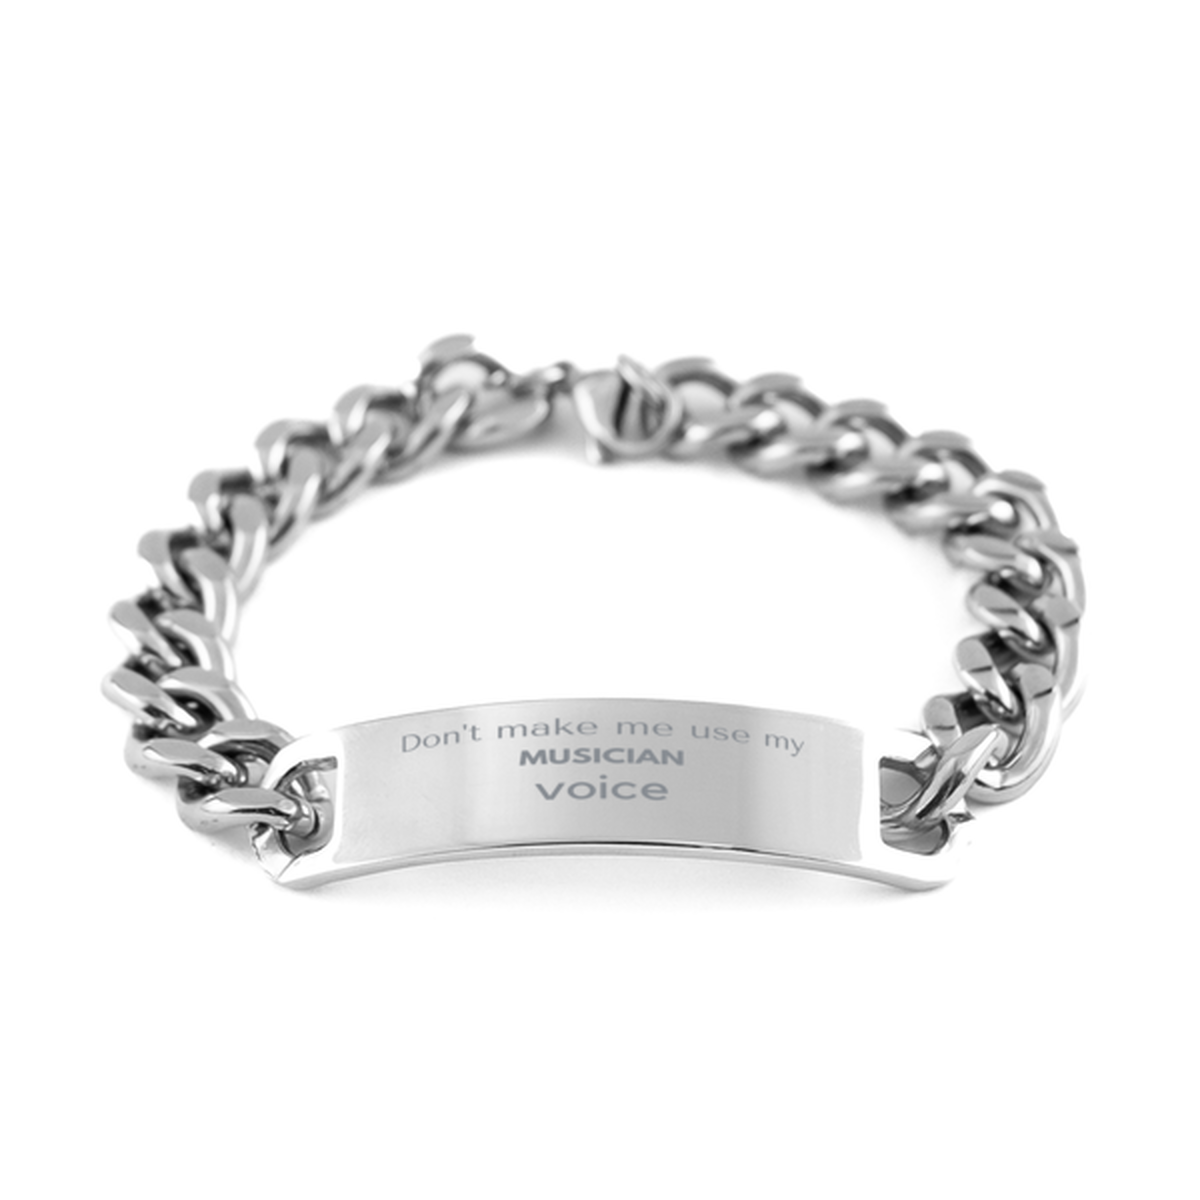 Don't make me use my Musician voice, Sarcasm Musician Gifts, Christmas Musician Cuban Chain Stainless Steel Bracelet Birthday Unique Gifts For Musician Coworkers, Men, Women, Colleague, Friends